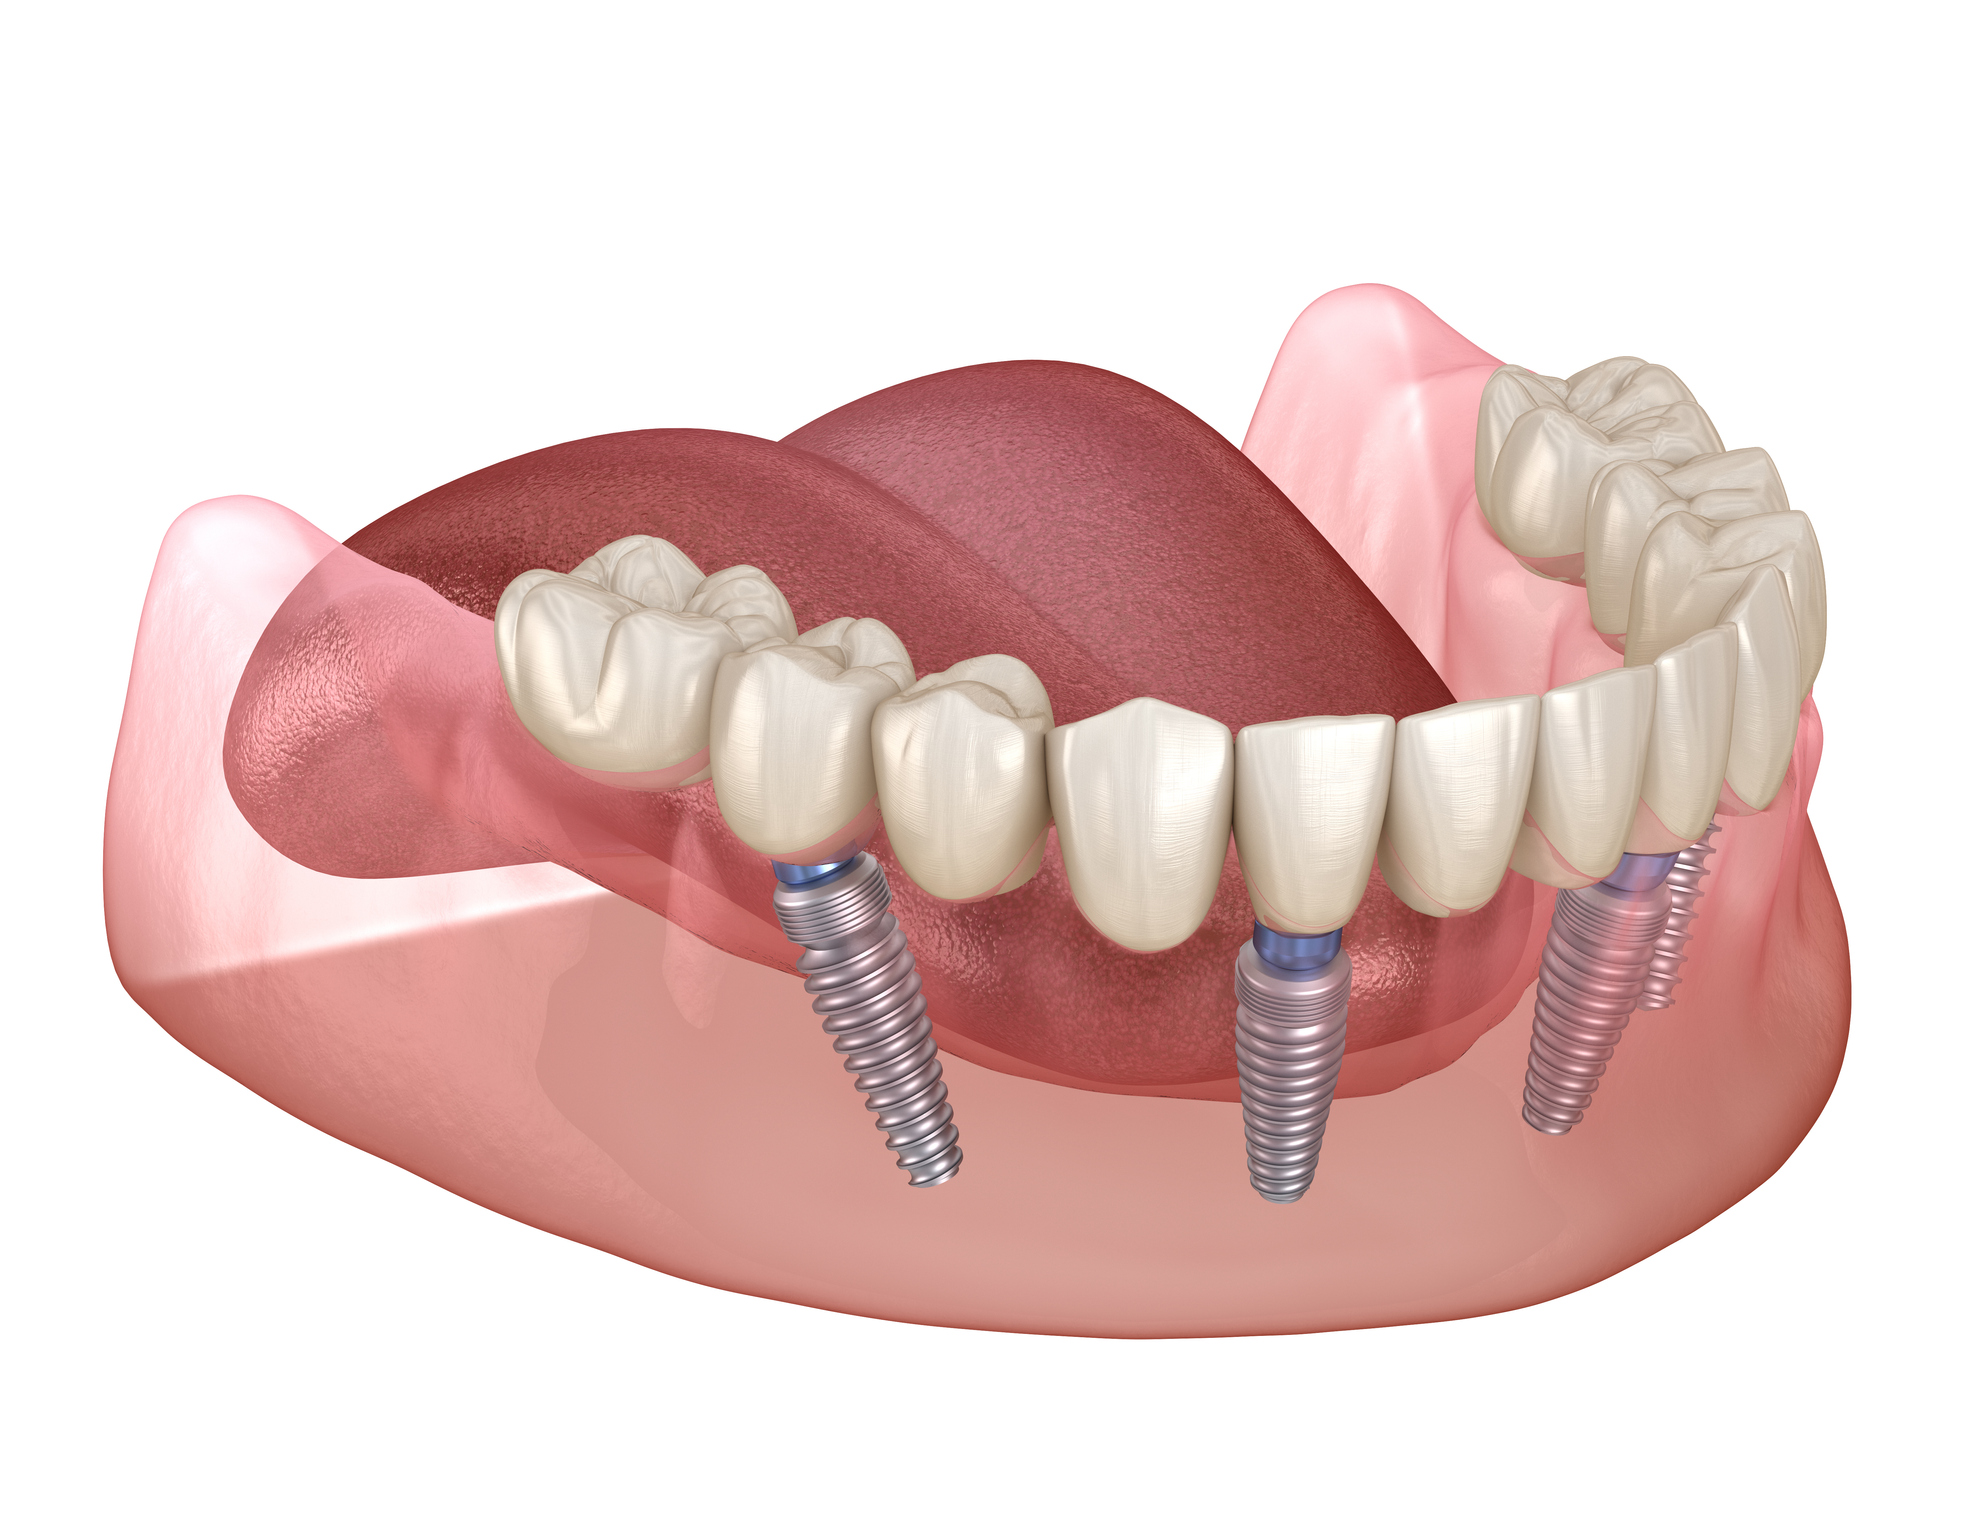 Graphic of lower teeth with dental implants.